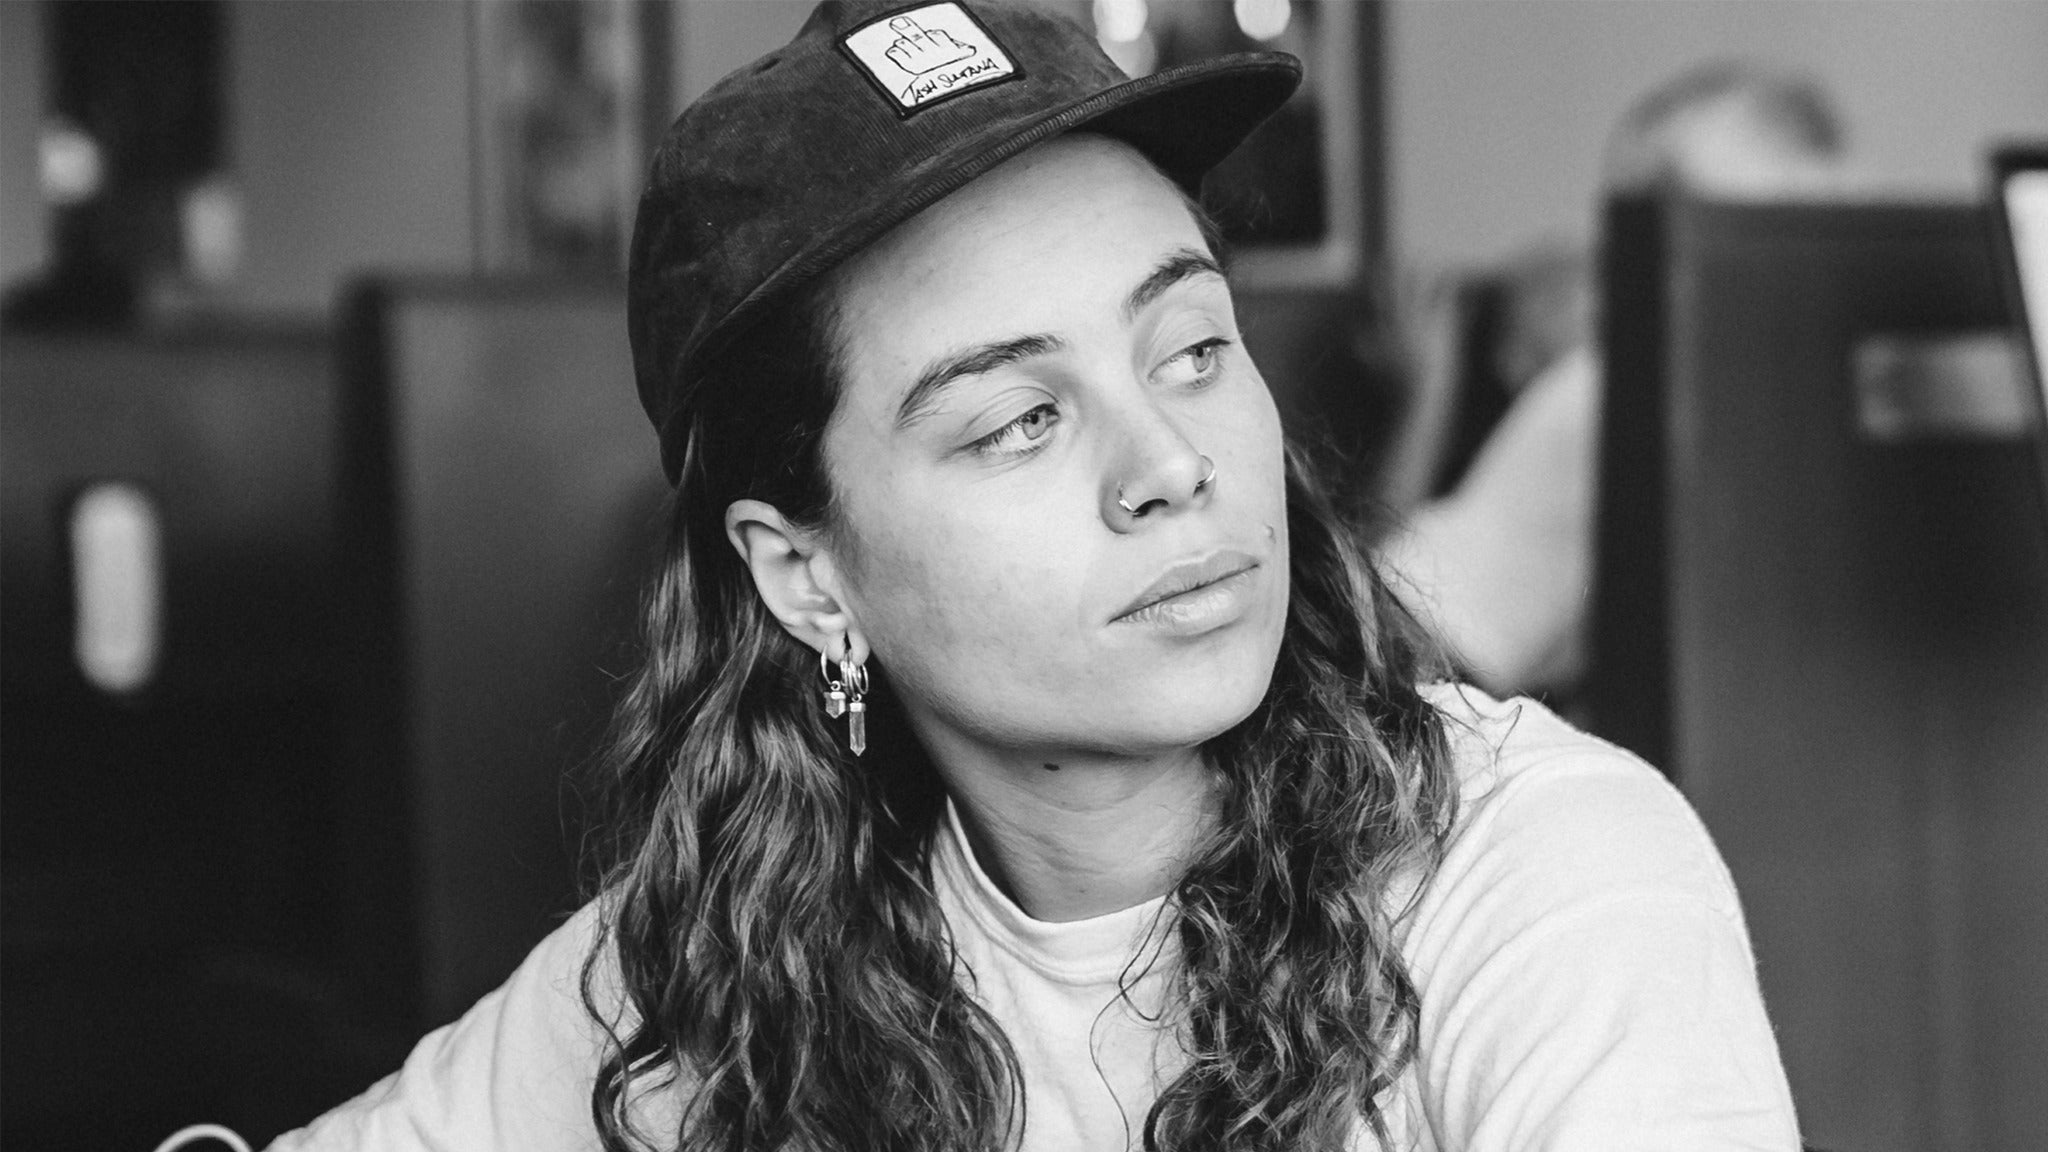 EVENT MOVED TO JACOB'S PAVILION: Tash Sultana in Cleveland promo photo for Live Nation presale offer code